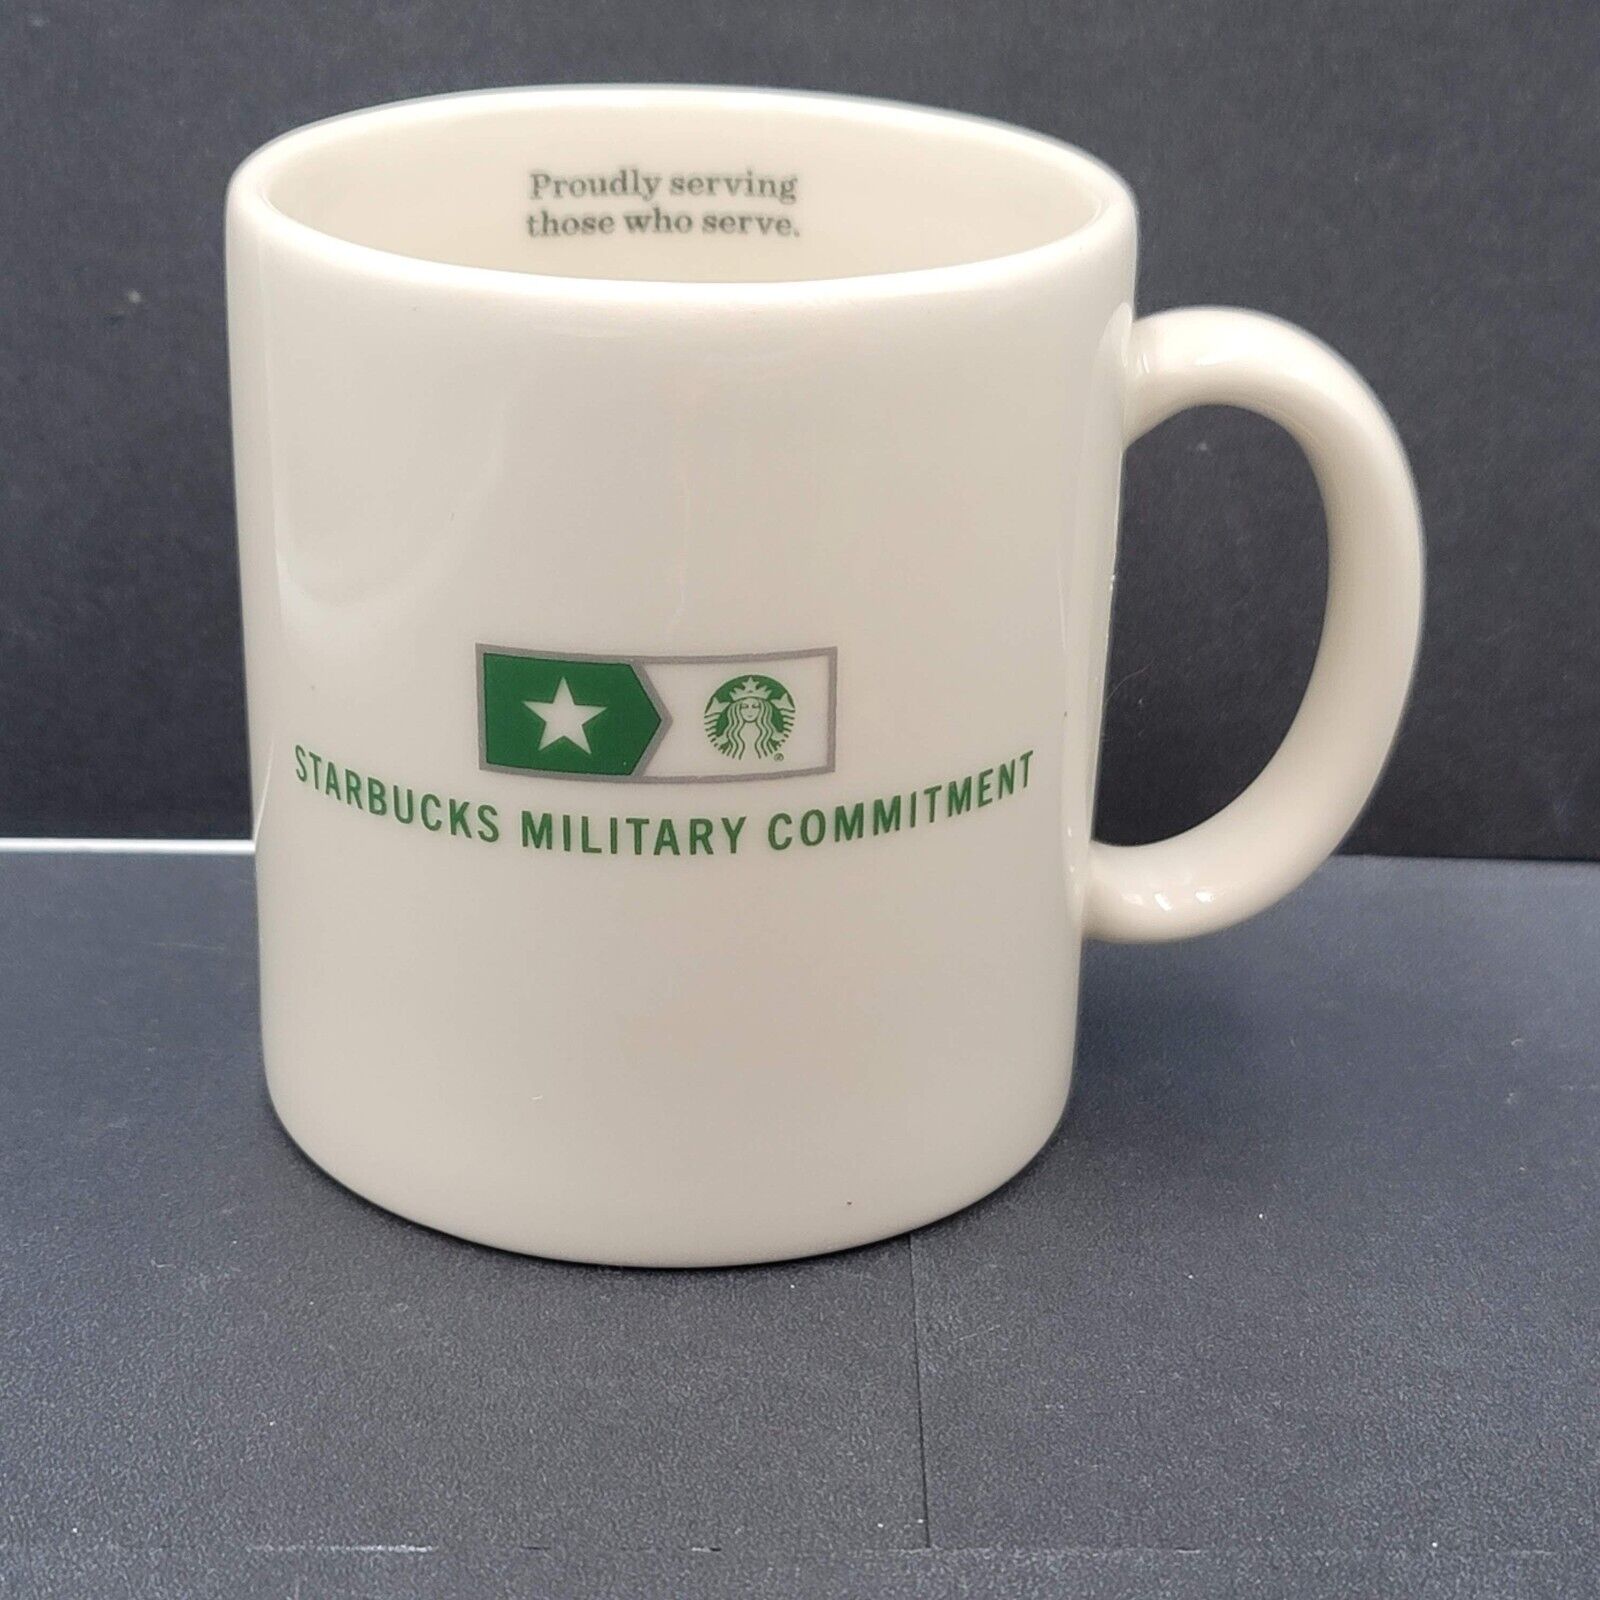 STARBUCKS MILITARY COMMITMENT Mug Proudly Serving Those Who Serve Made In USA